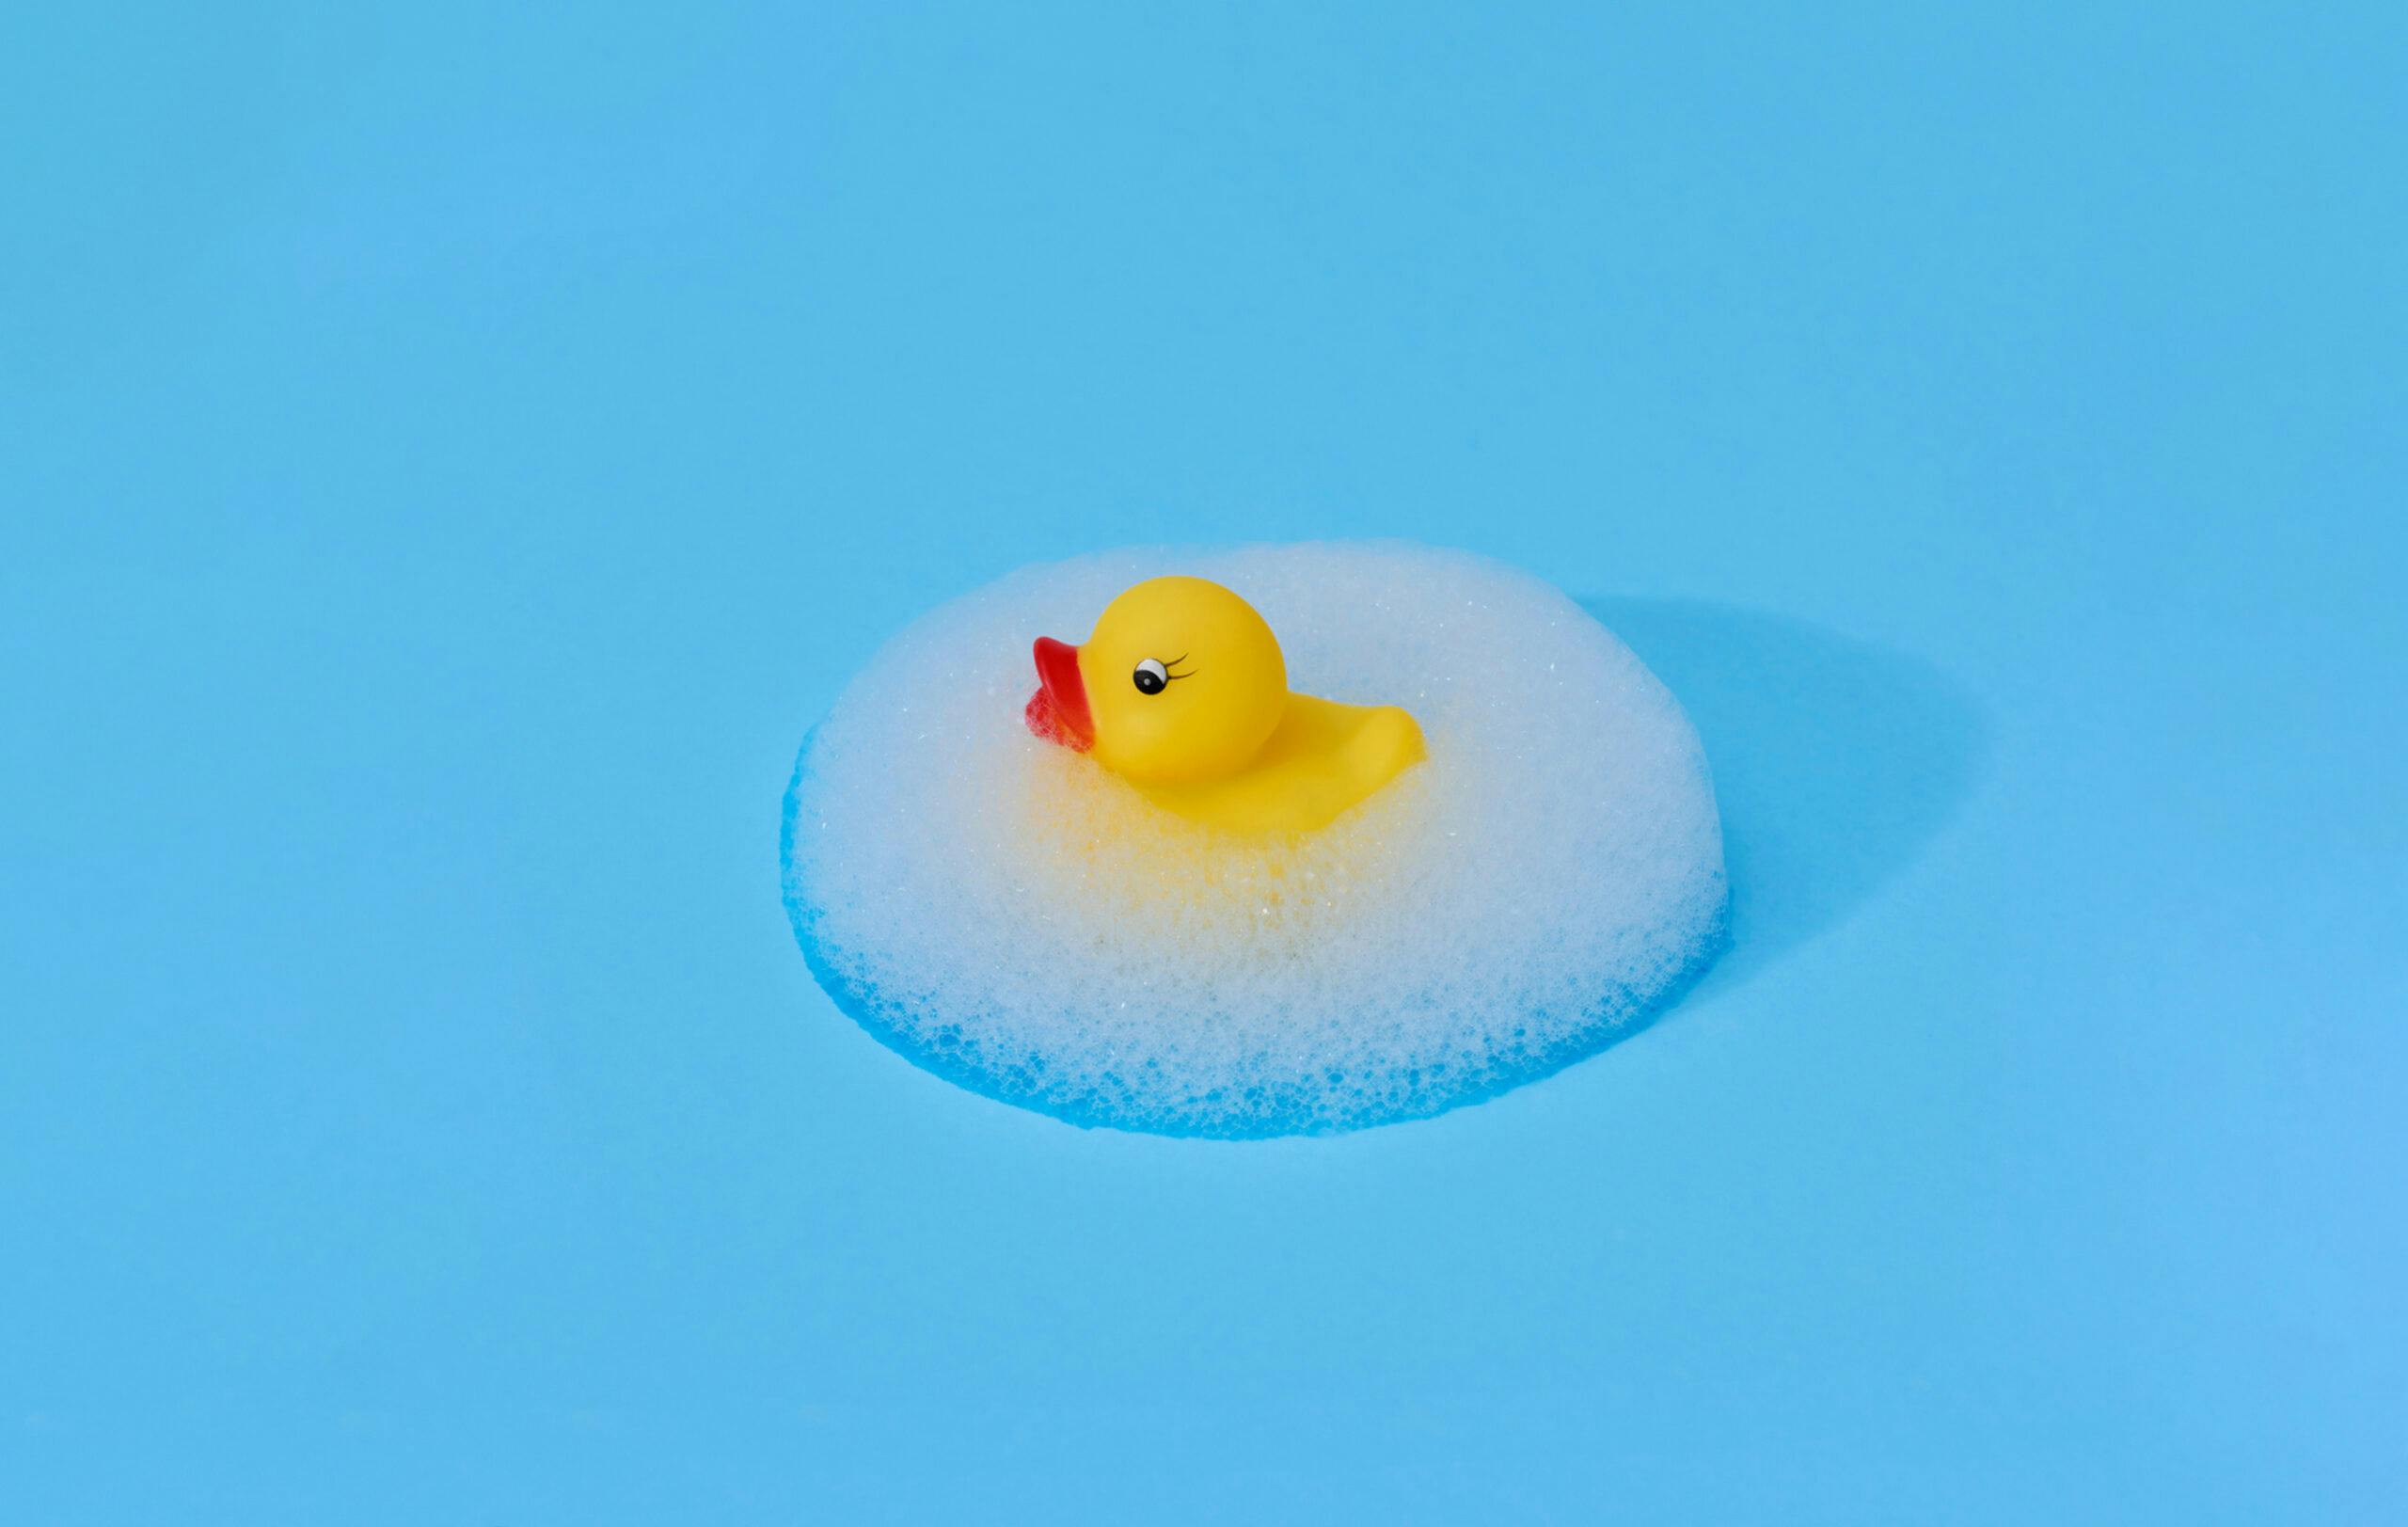 Yellow rubber duck surrounded by a symmetrical ellipsis of foam against a bright blue background.